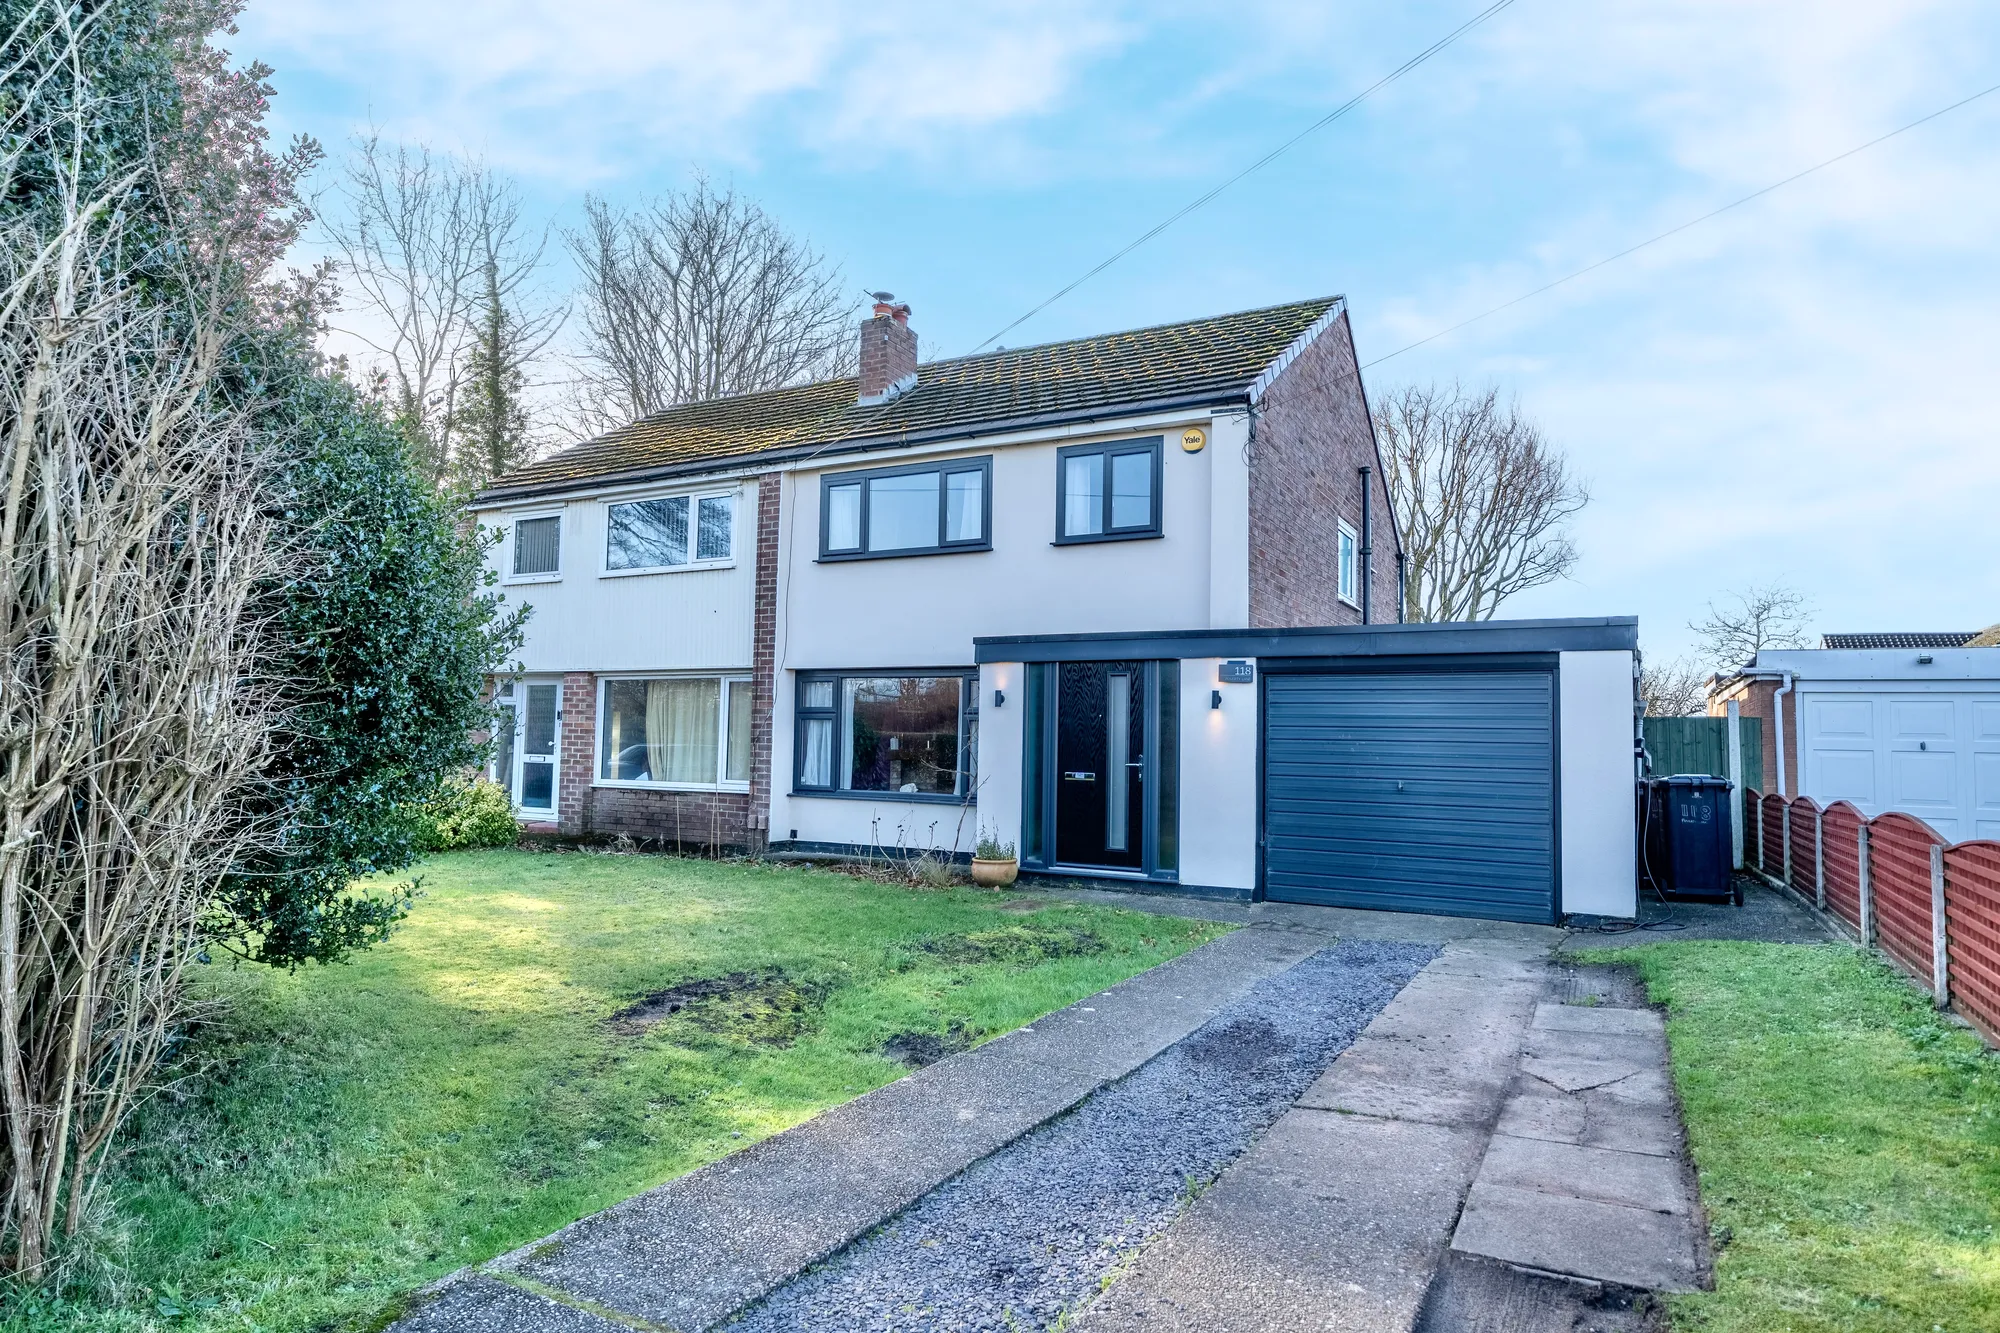 3 bed semi-detached house for sale in Poverty Lane, Liverpool - Property Image 1